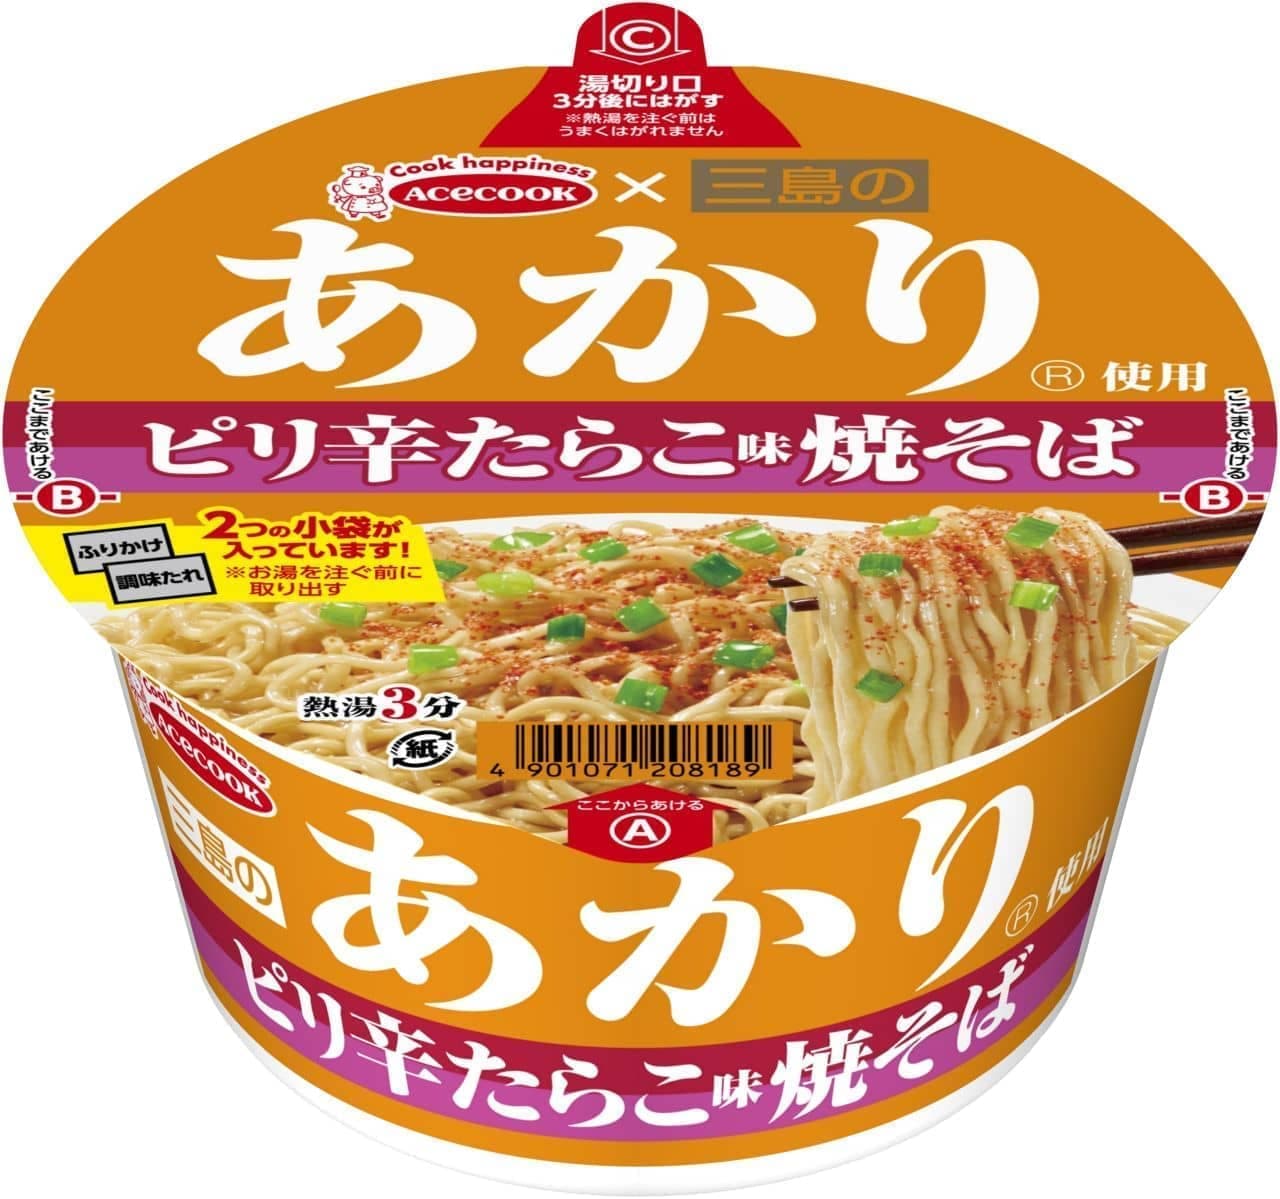 Ace Cook "Spicy cod roe flavored yakisoba made with Akari Mishima".